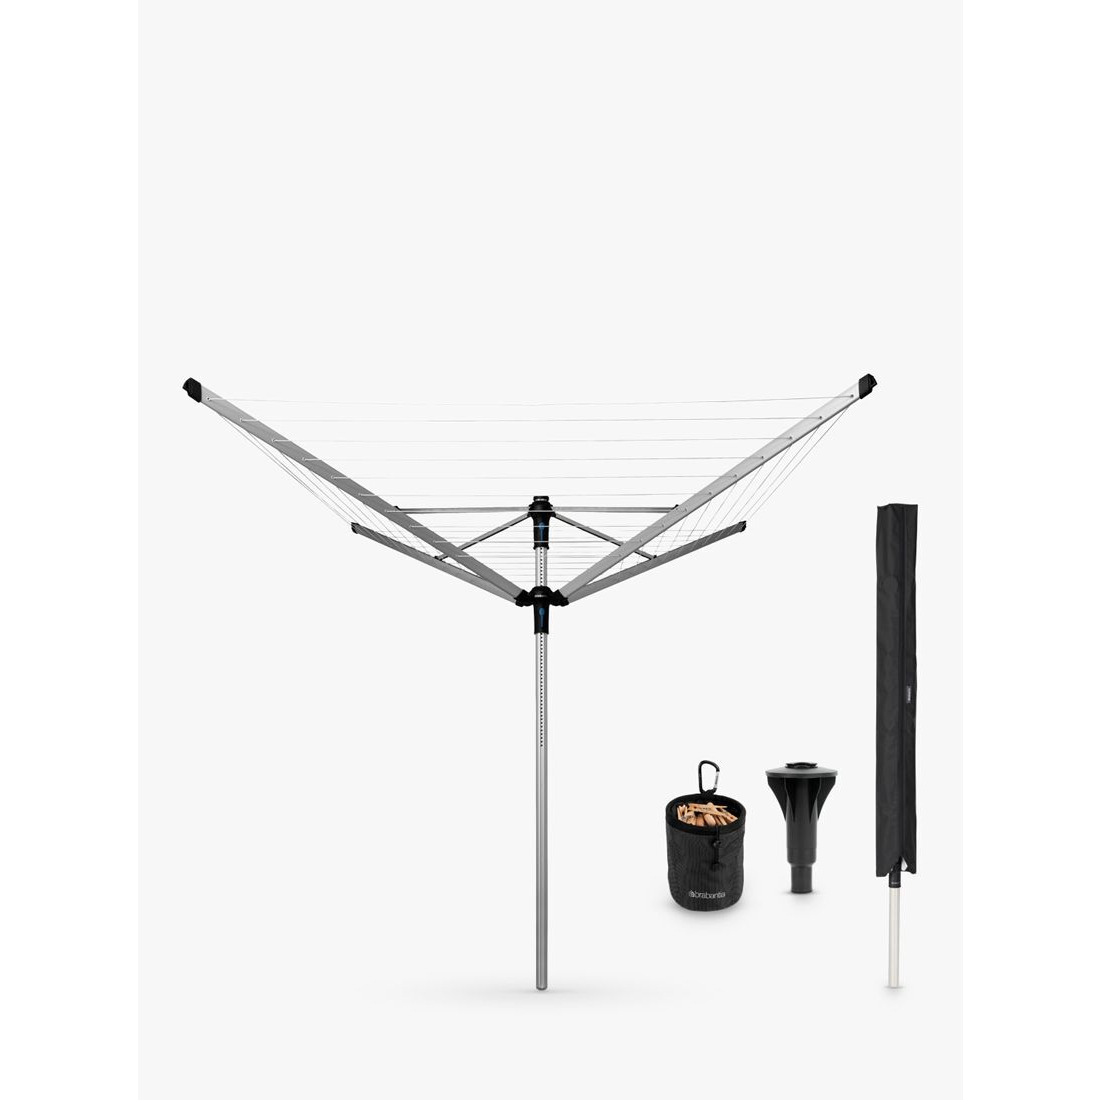 Brabantia Lift-O-Matic Advance Rotary Airer with Concrete Tube and Cover, 50m - image 1